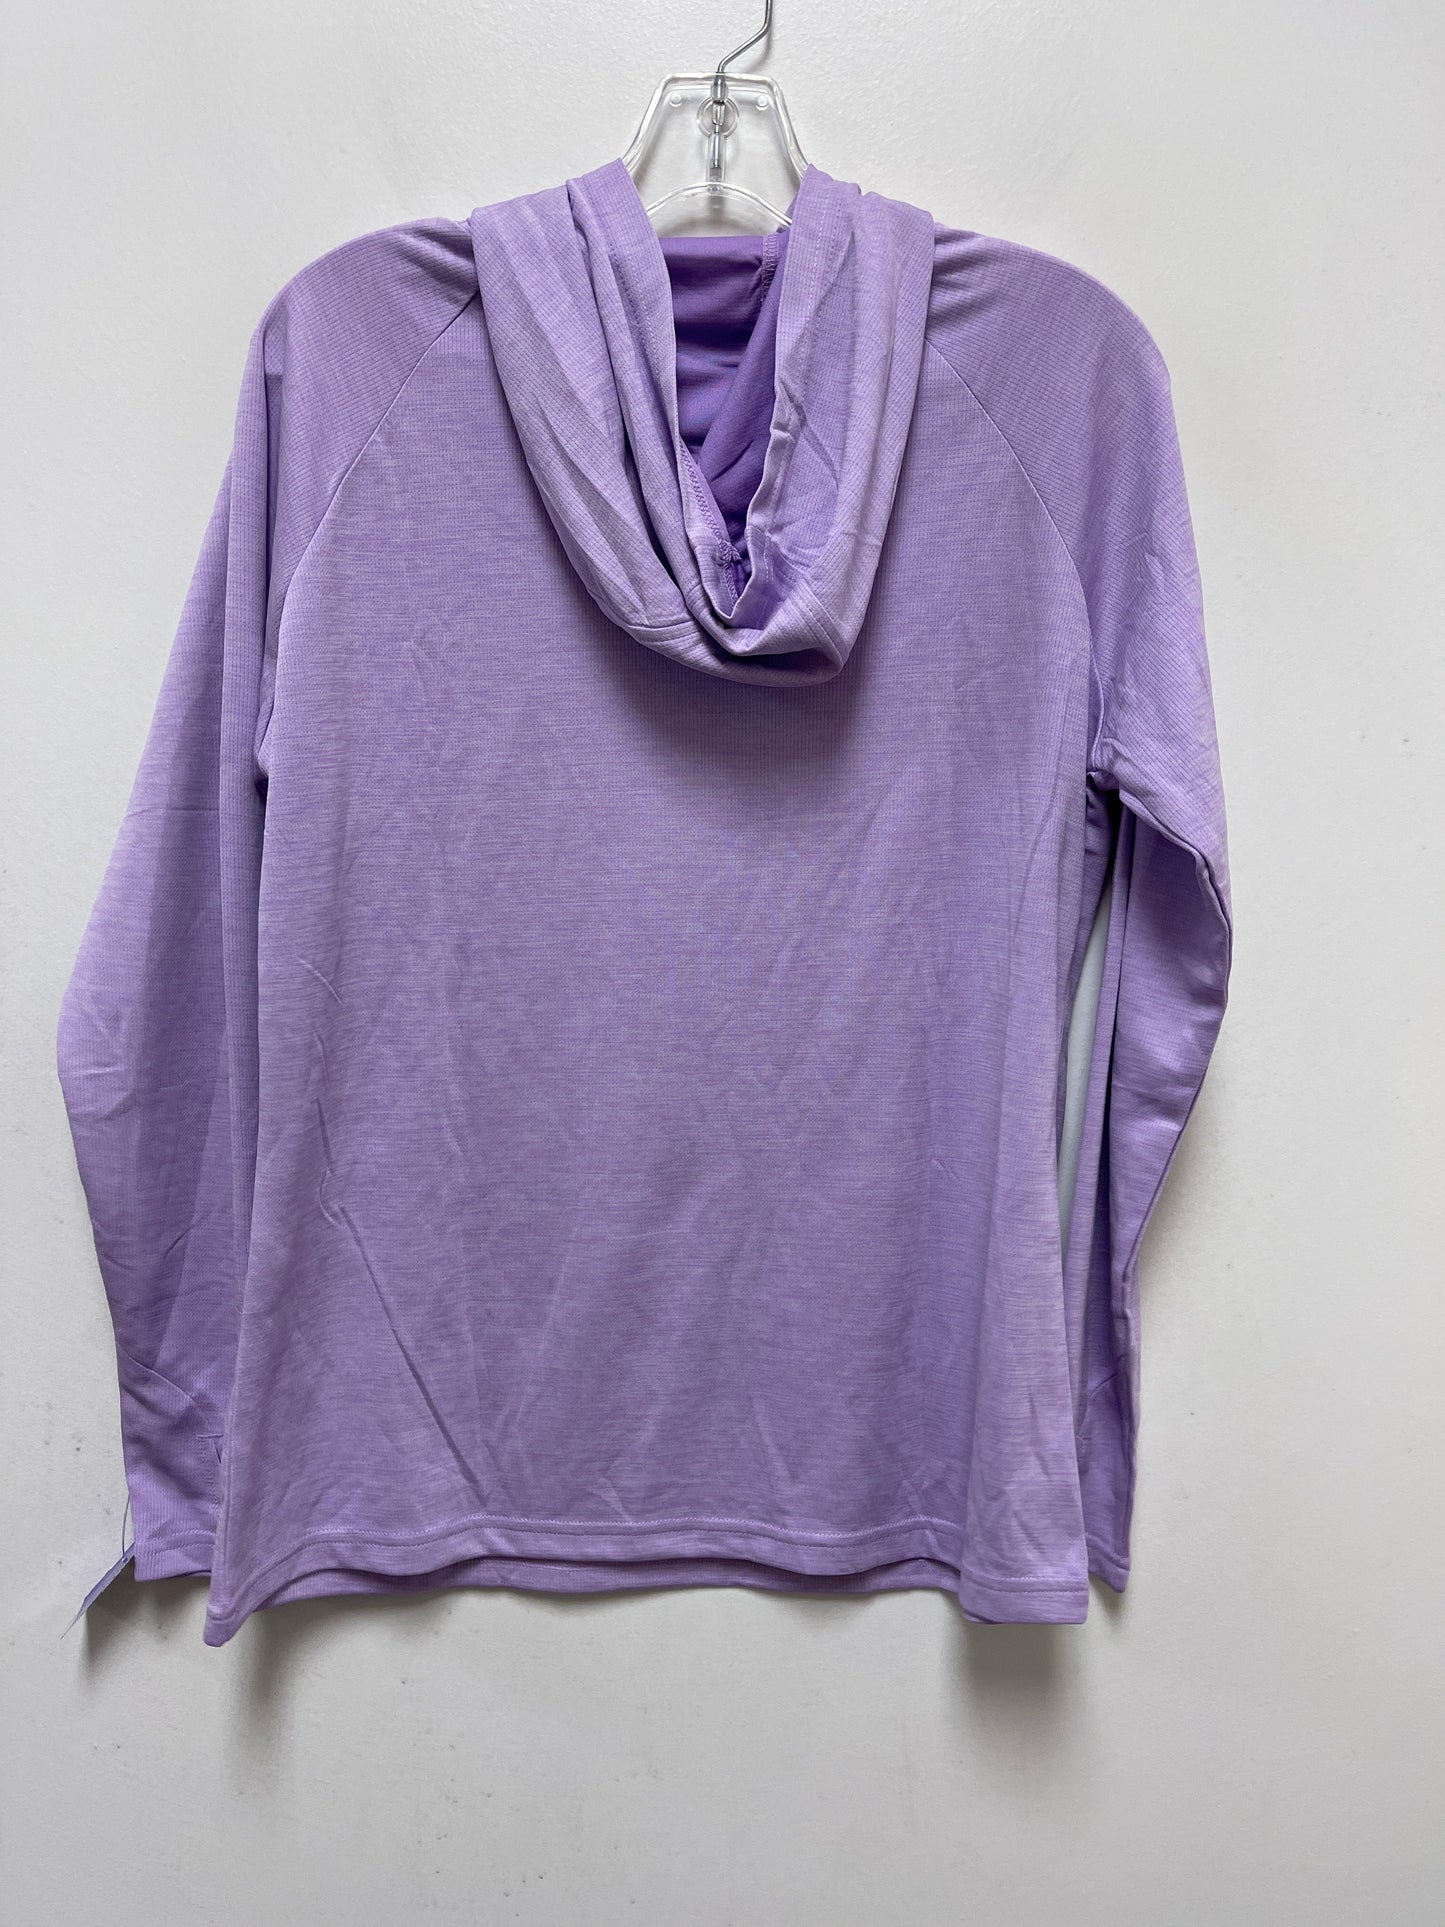 Purple Athletic Top Long Sleeve Collar Clothes Mentor, Size Xl